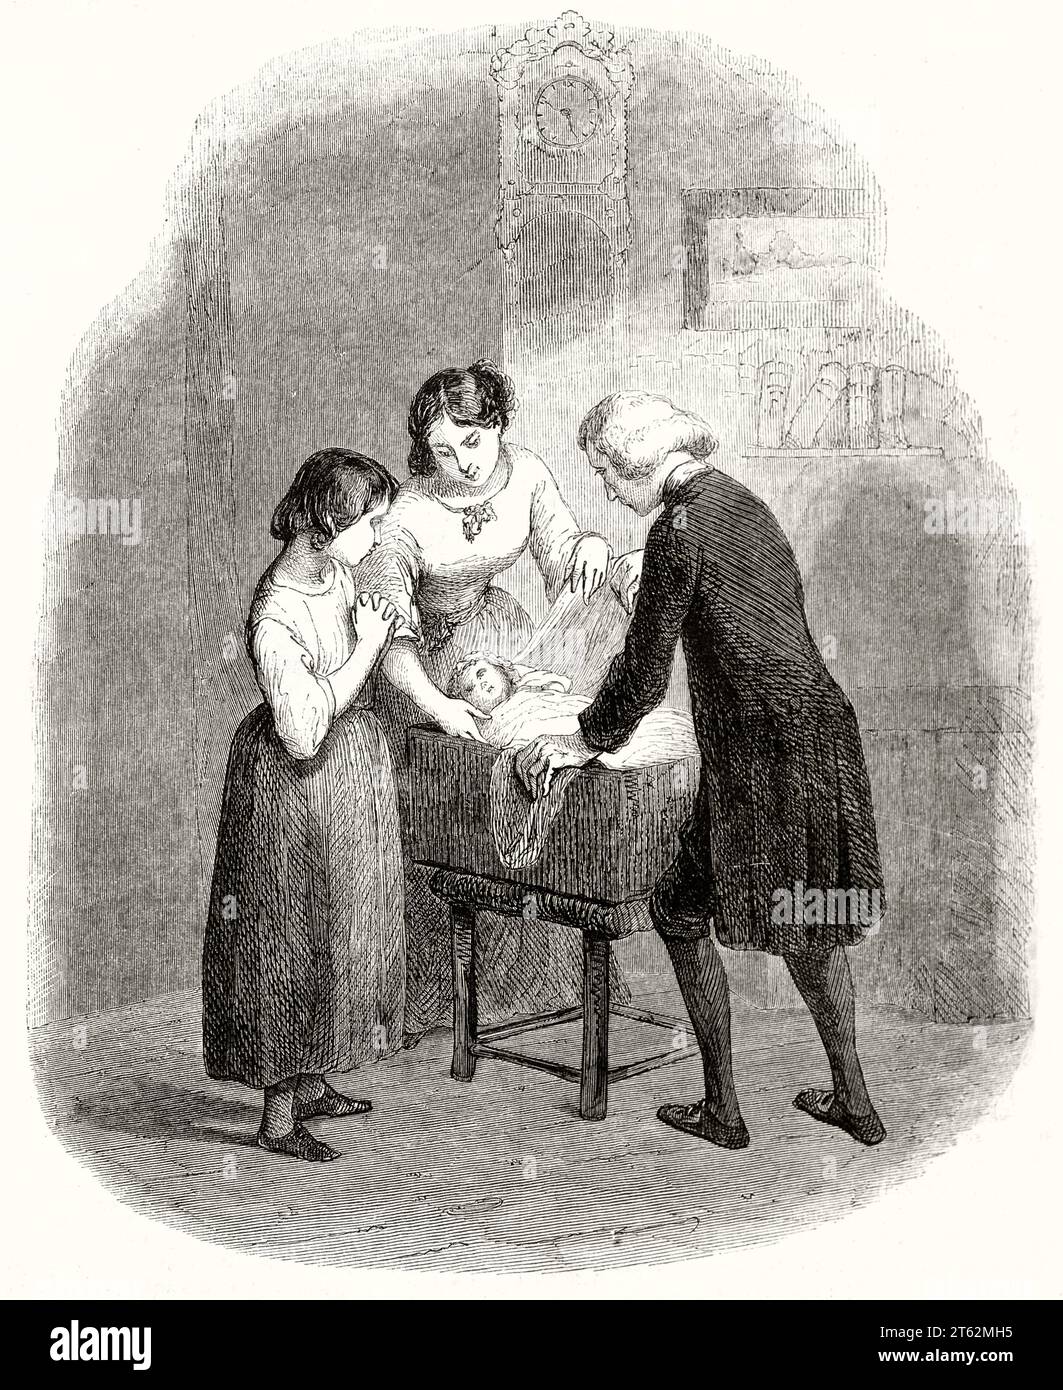 Old illustration of adults taking care of a baby. By Tony Johannot, publ. on Magasin Pittoresque, Paris, 1849 Stock Photo